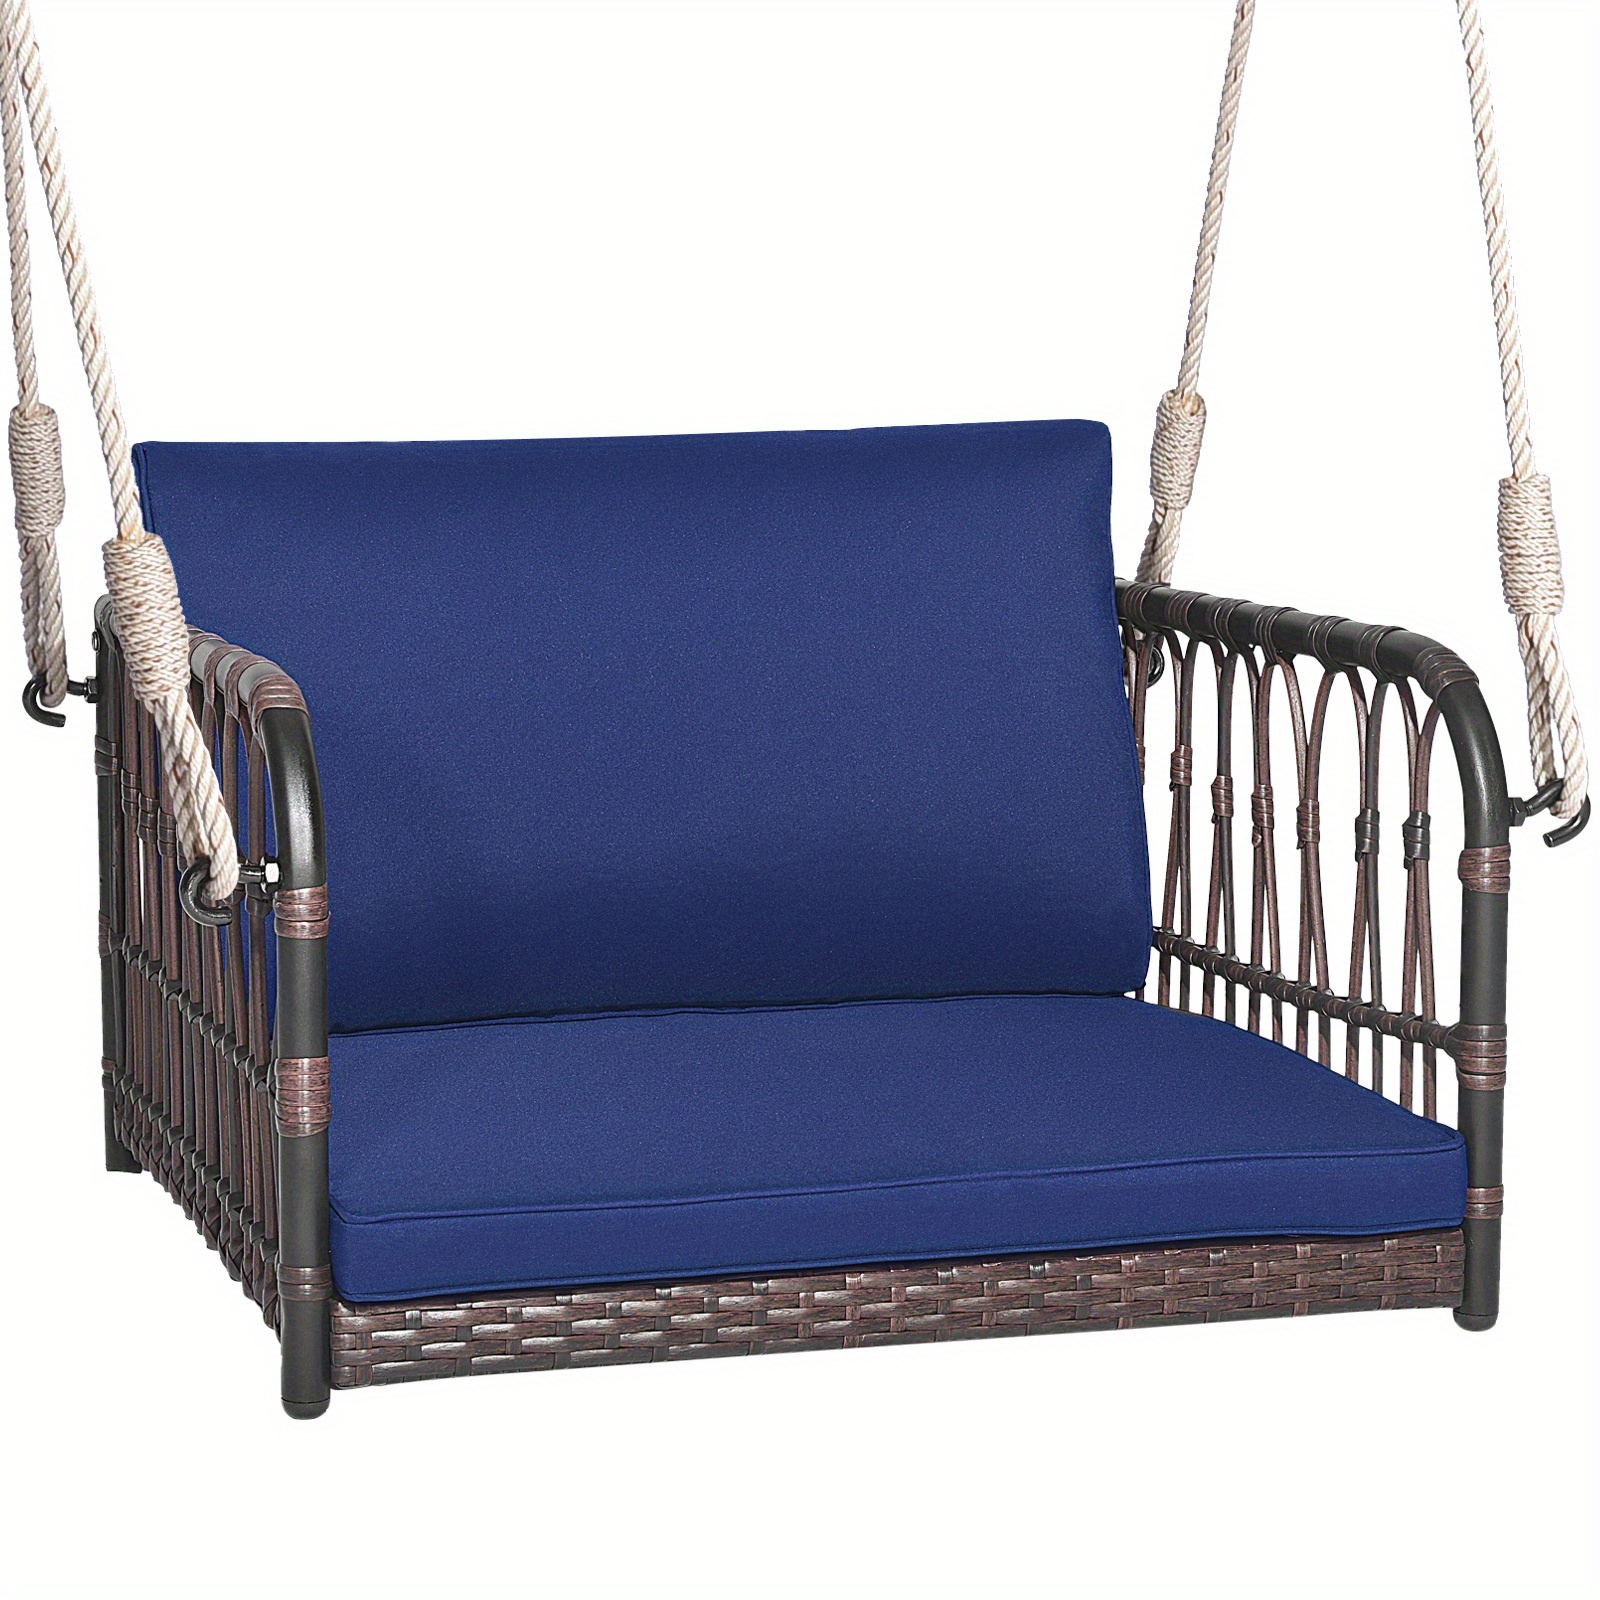 

Costway Porch Swing Chair Rattan Woven Hanging Bench Seat W/ Cushions Hooks Balcony Navy